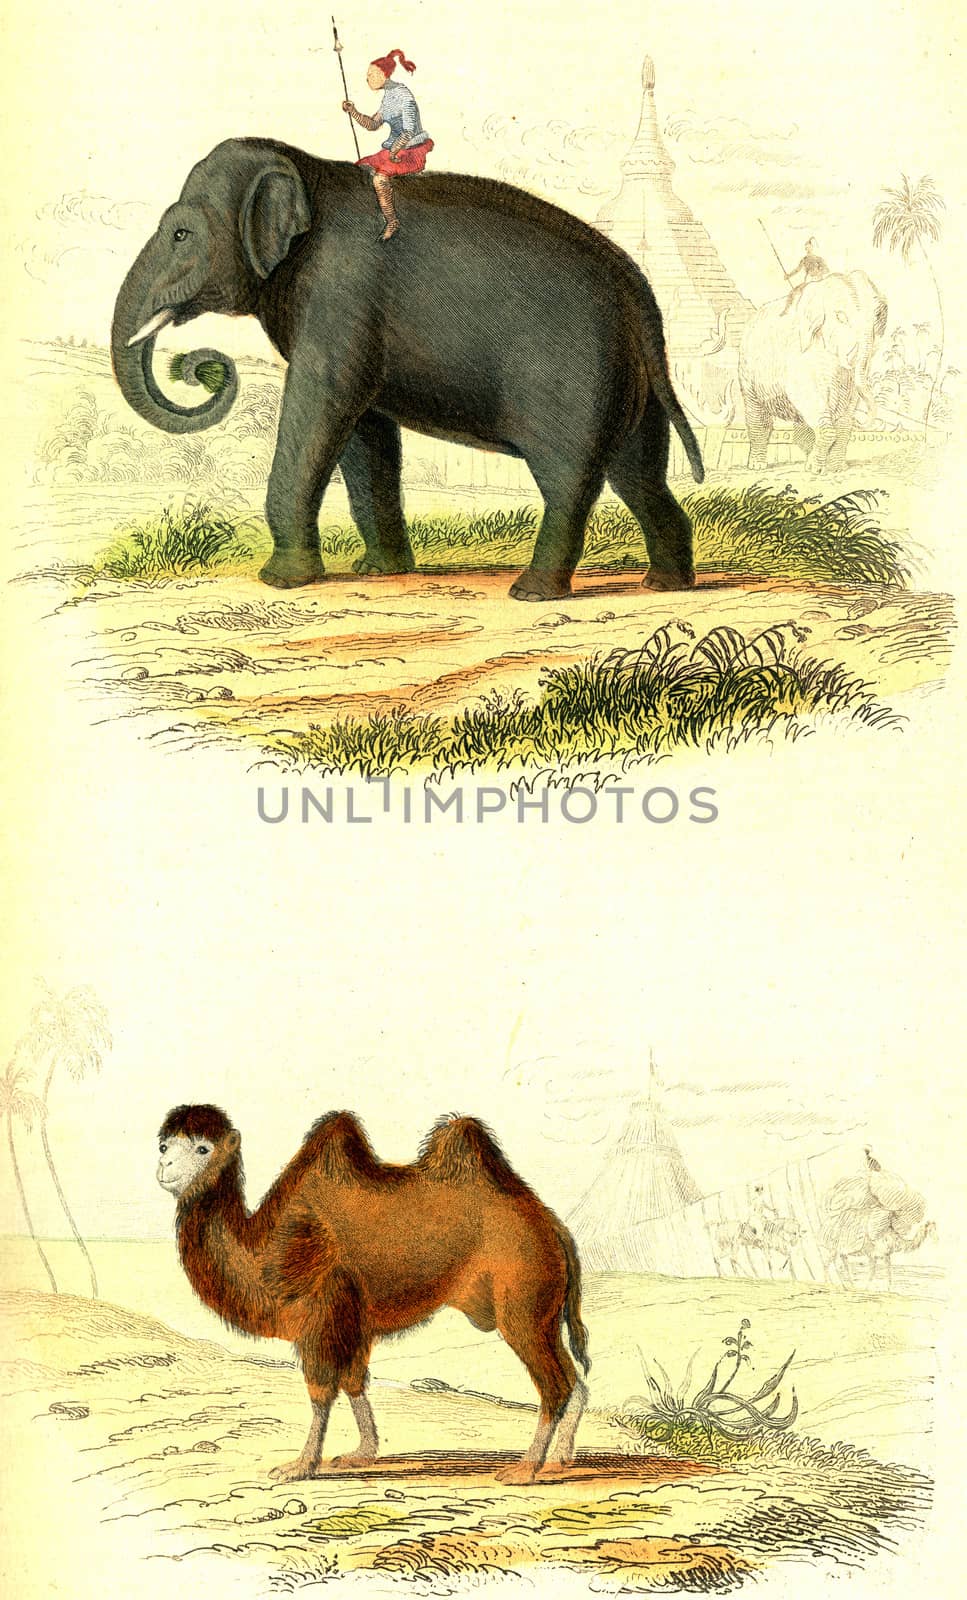 The Elephant, The Camel, vintage engraved illustration. From Buffon Complete Work.
